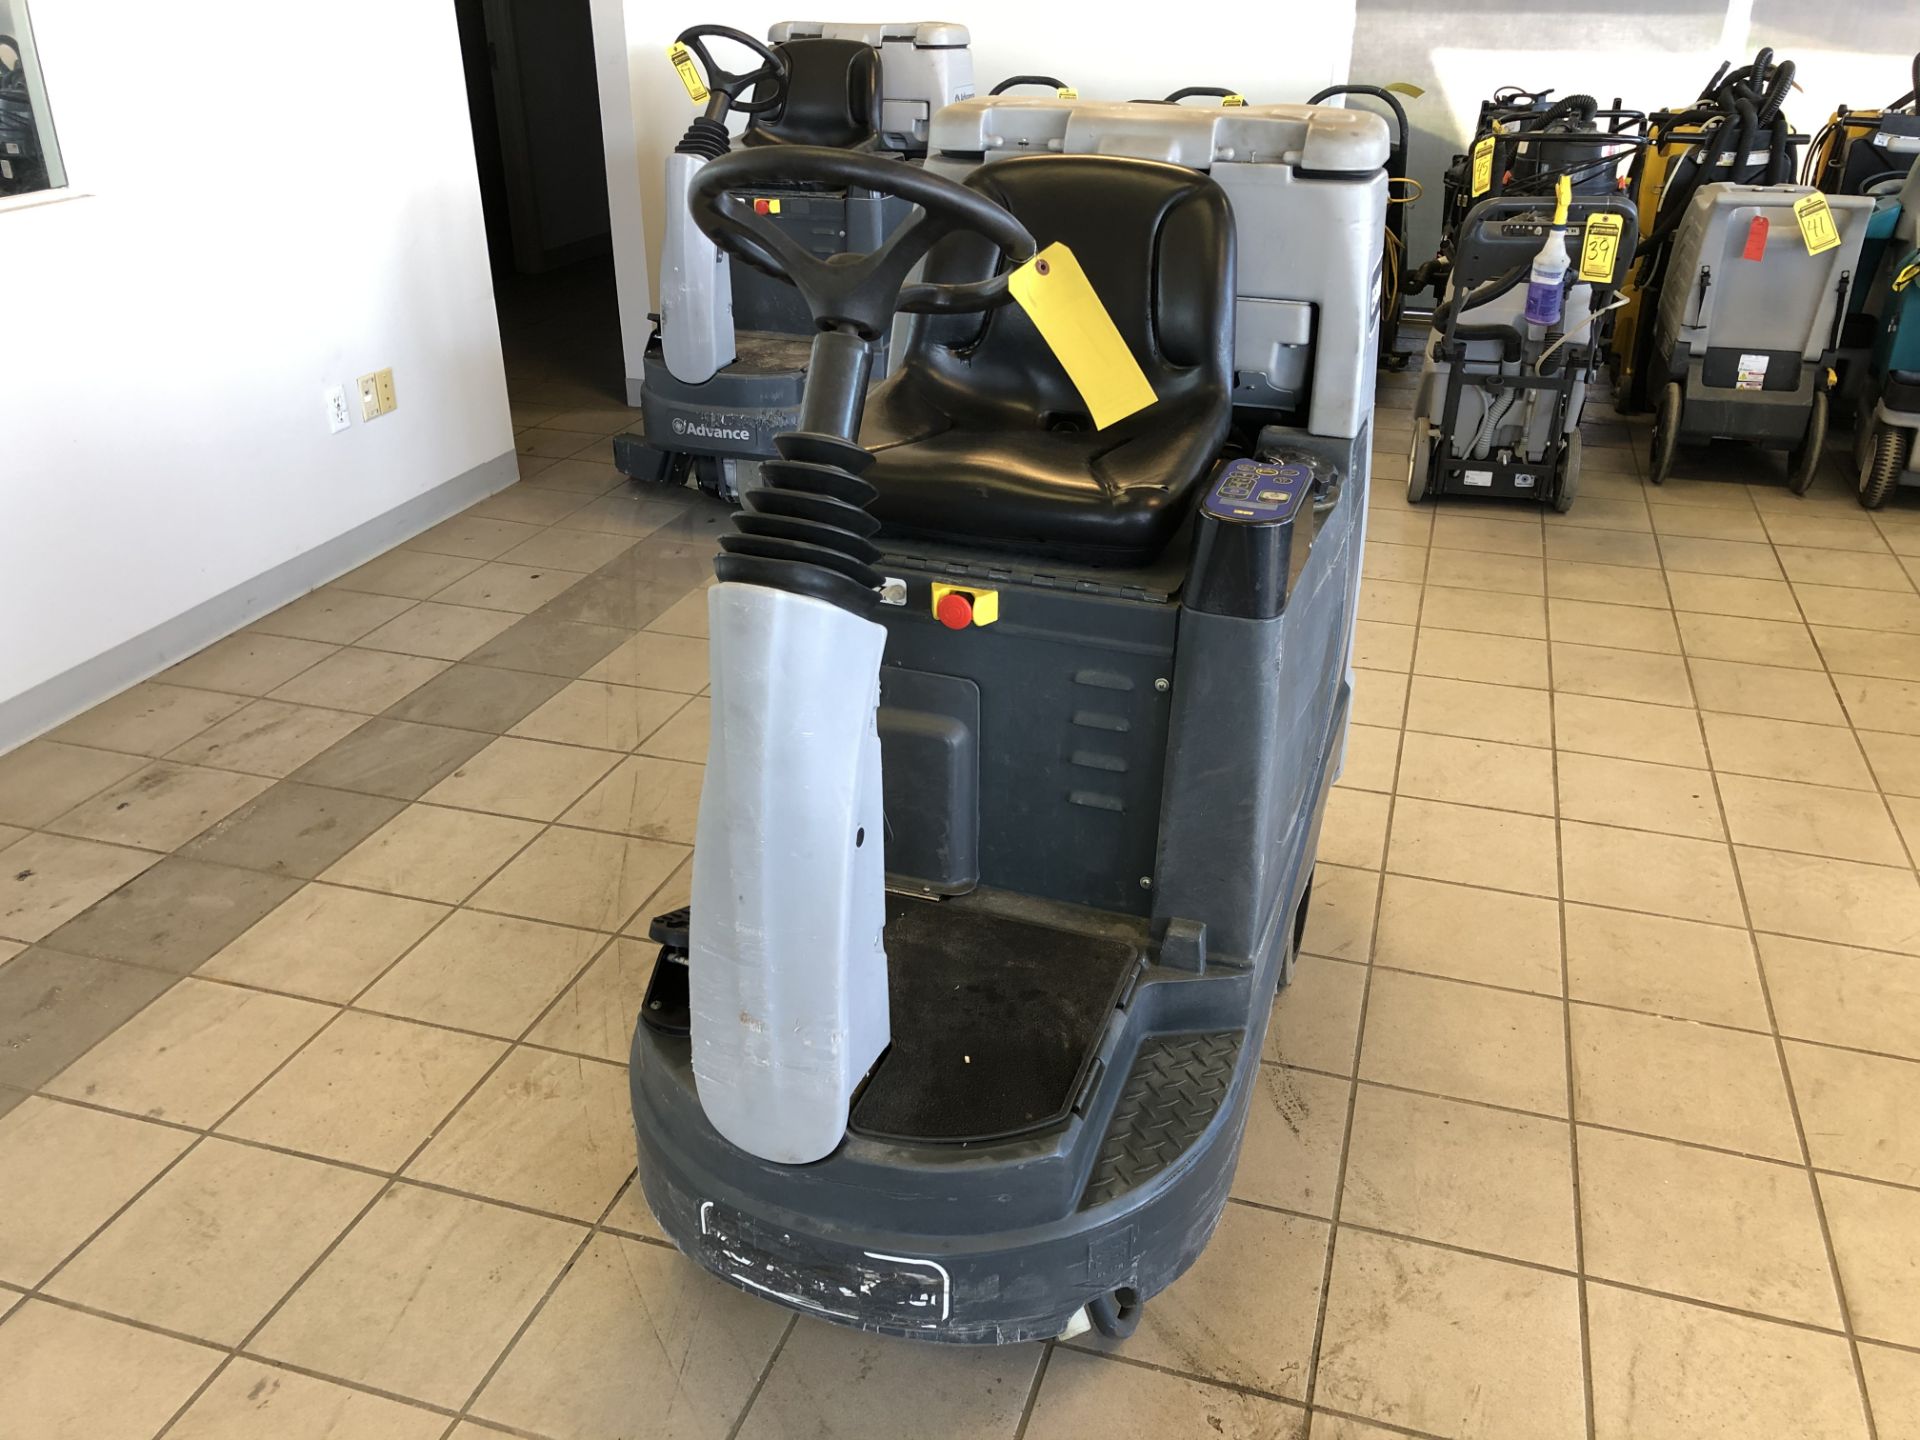 2016 ADVANCE RIDE-ON FLOOR SCRUBBER, MODEL: ES4000, S/N: 3000178054, 24-VOLT, WEIGHT: 1,447-LBS., - Image 2 of 9